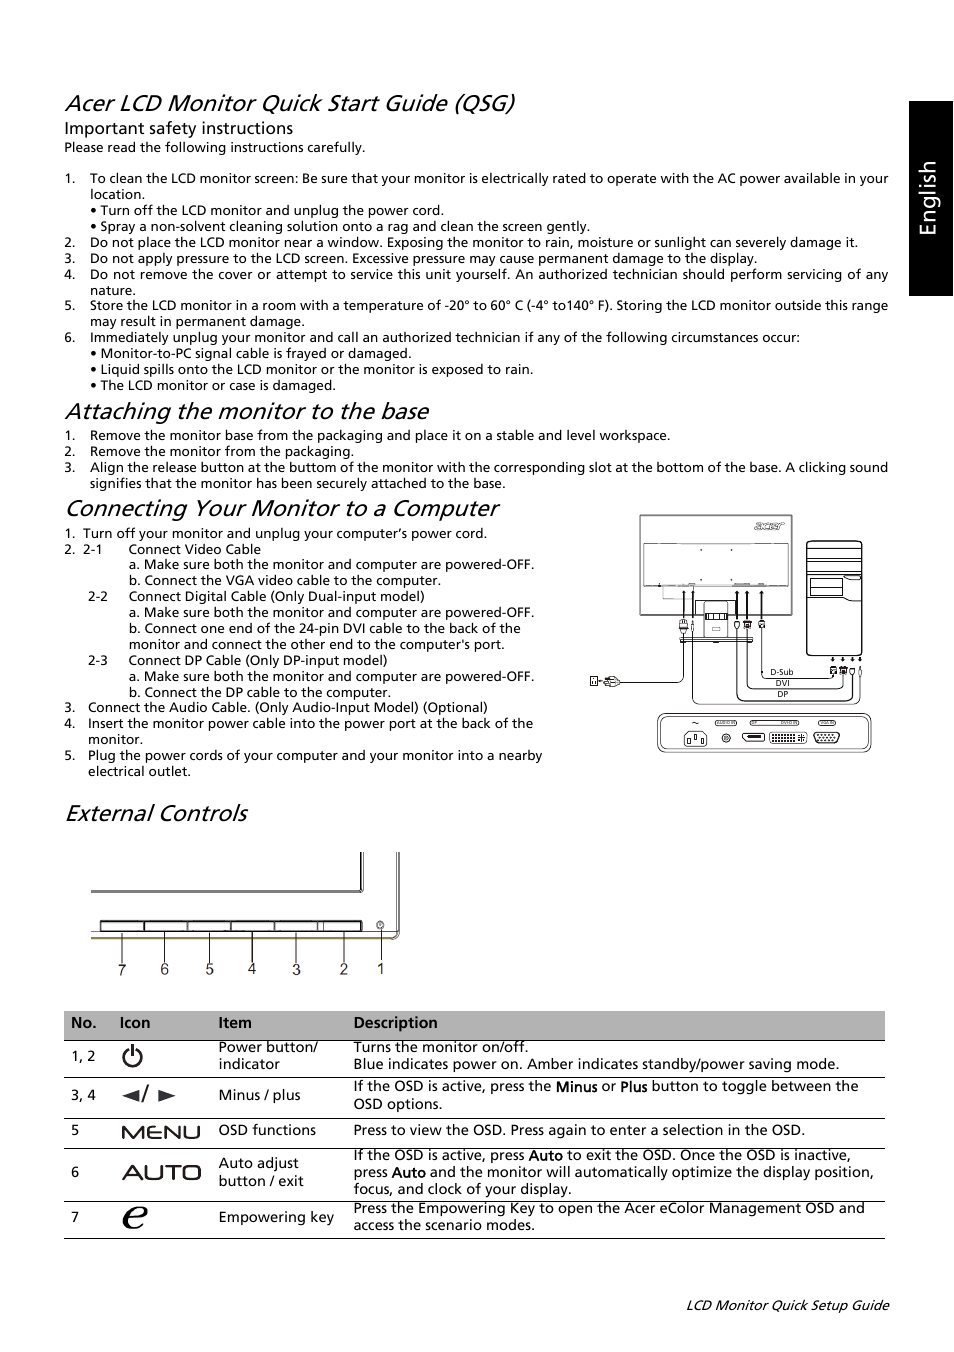 Acer lcd monitor quick start guide (qsg), Attaching the monitor to the  base, Connecting your monitor to a computer | Acer K242HL User Manual |  Page 2 / 72